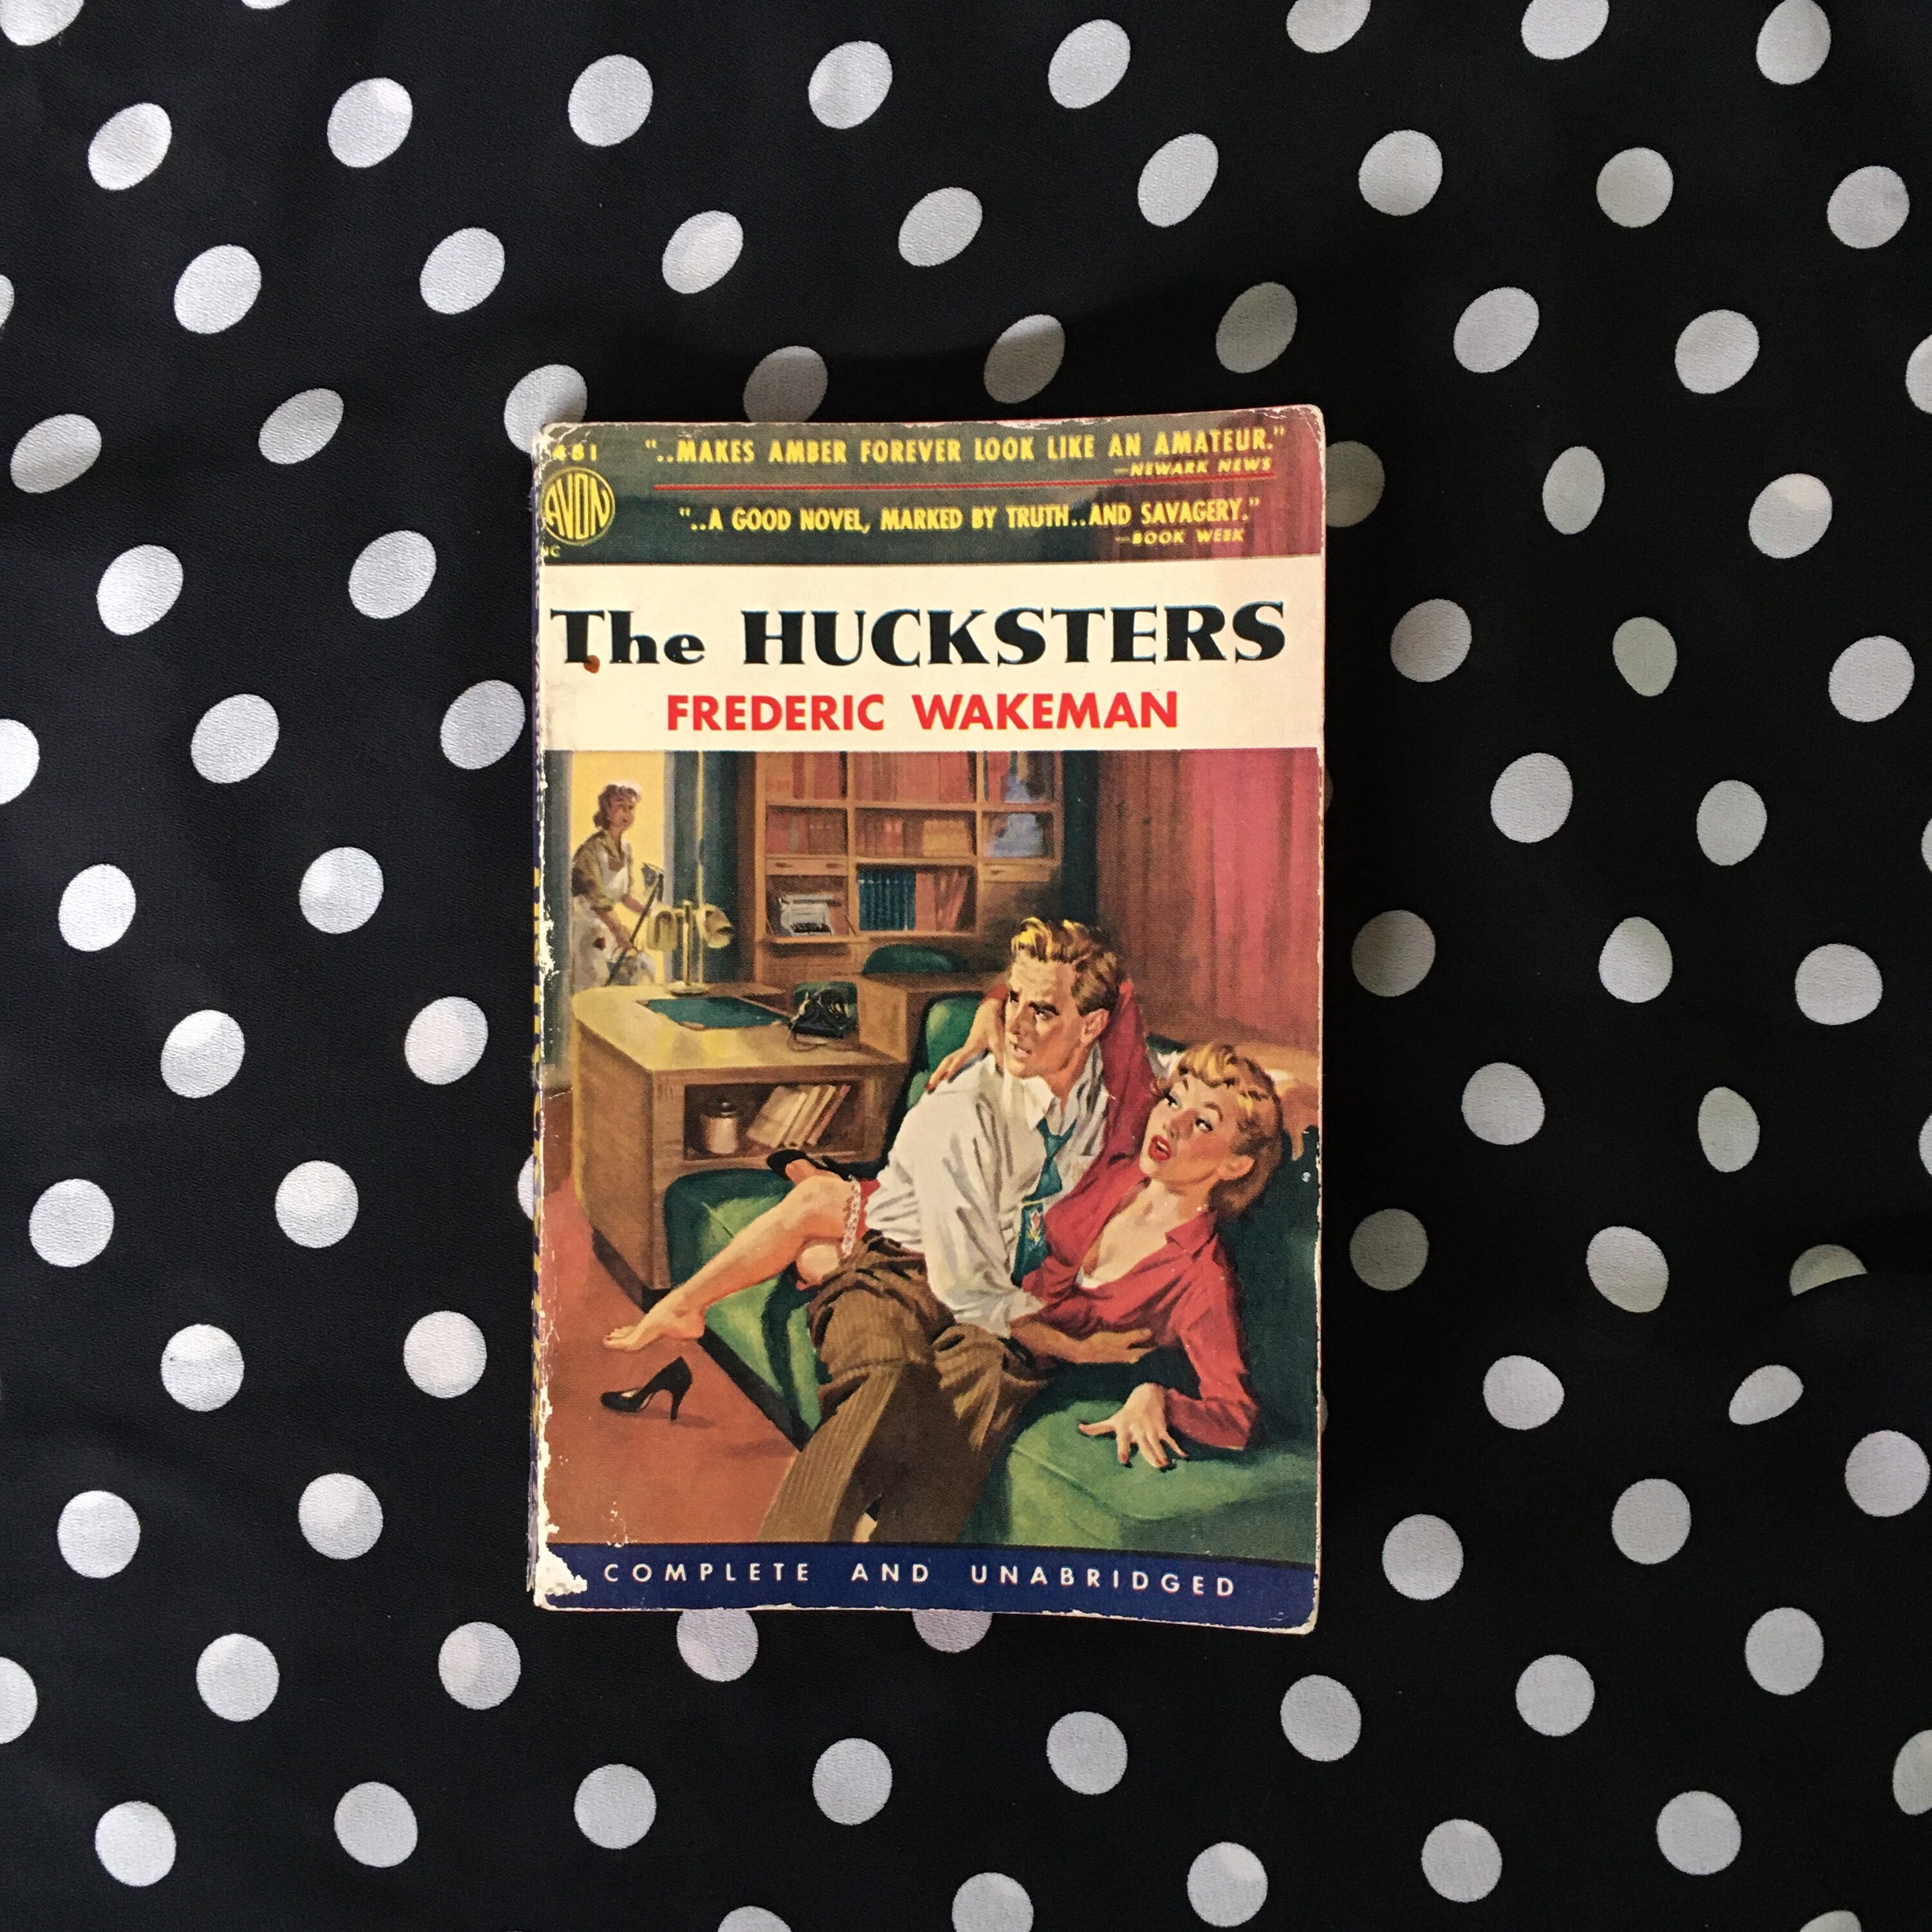 The Hucksters by Frederic Wakeman Vintage 1952 Paperback photo